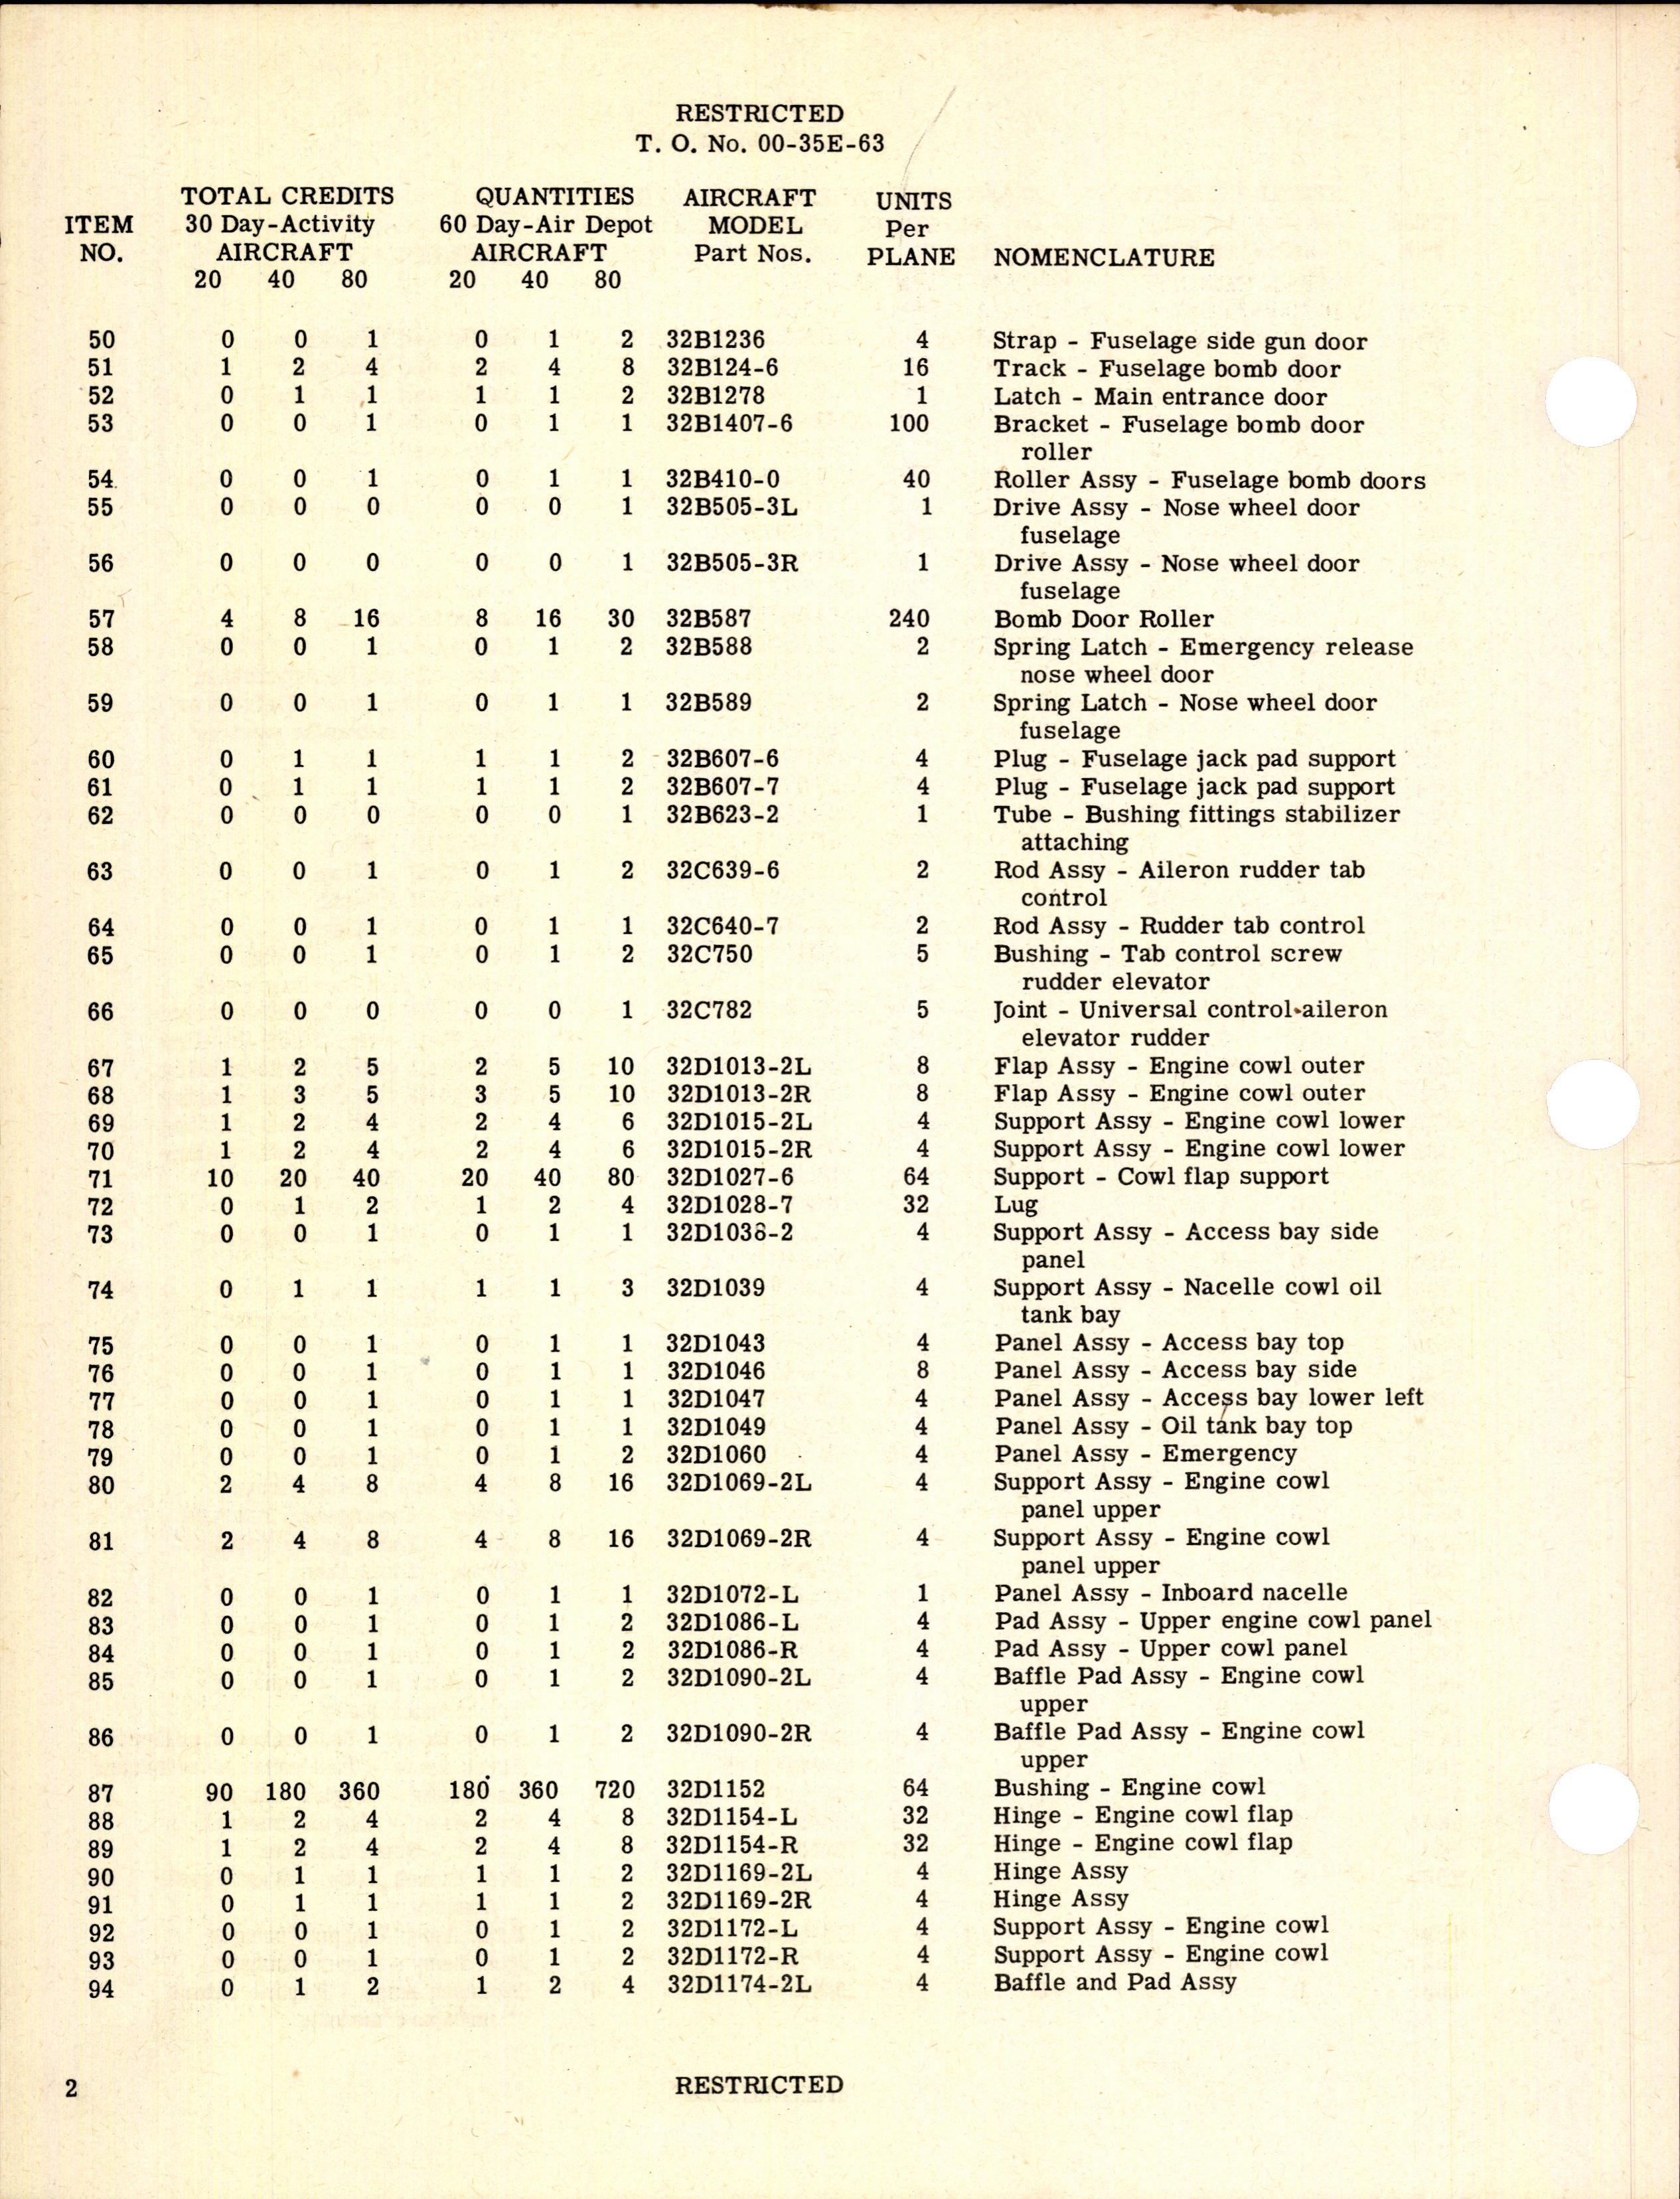 Sample page 4 from AirCorps Library document: Table of Credit Aircraft Maintenance Parts for B-24D Aircraft